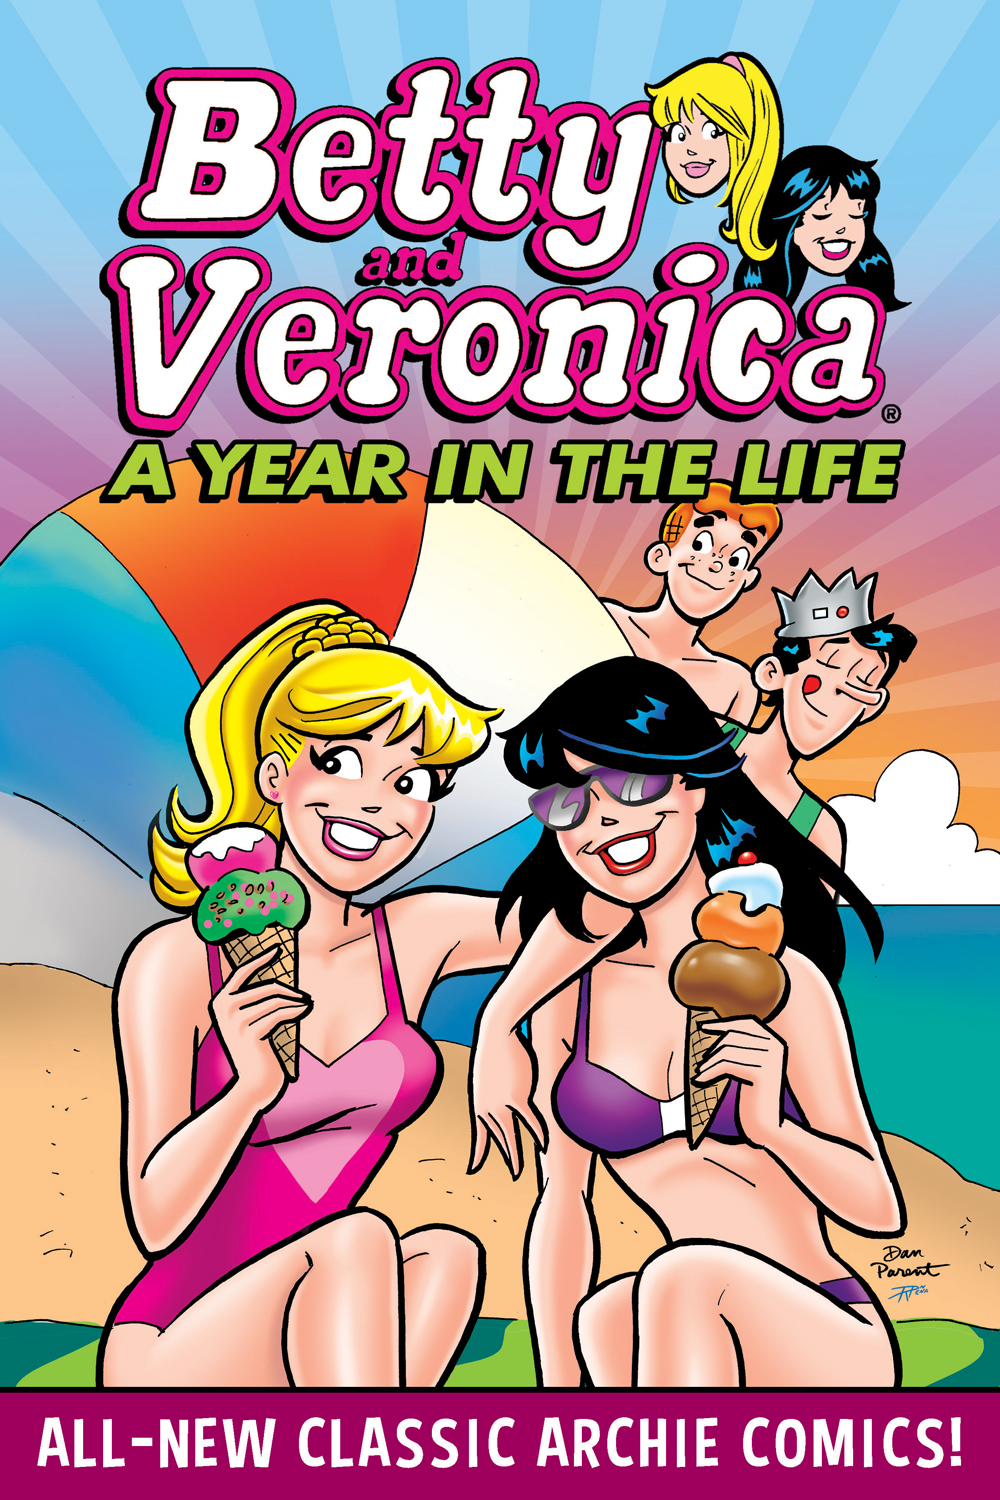 Betty and Veronica are on the beach in swimsuits, smiling at the reader, eating ice cream cones. Archie and Jughead look on in the background, hiding behind a beach ball, and Jughead has his tongue out, hungry for the ice cream.